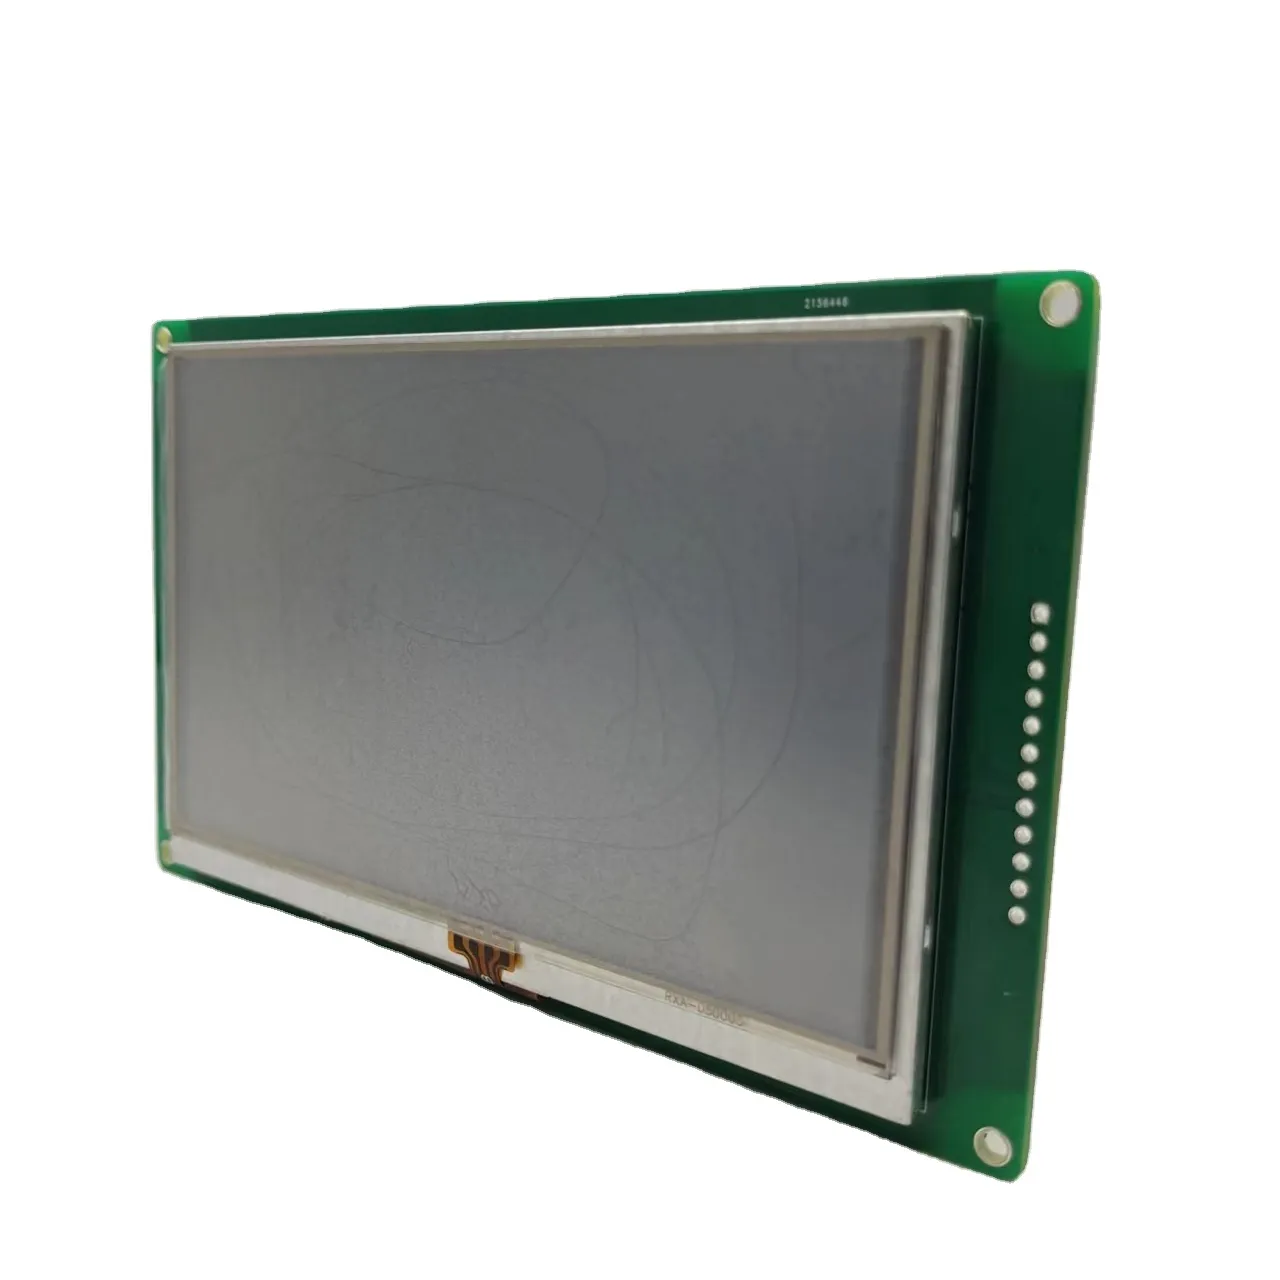 5 inch tft lcd driver board RA8875 480*272 resolution 1/2 layers SPI/I2C serial